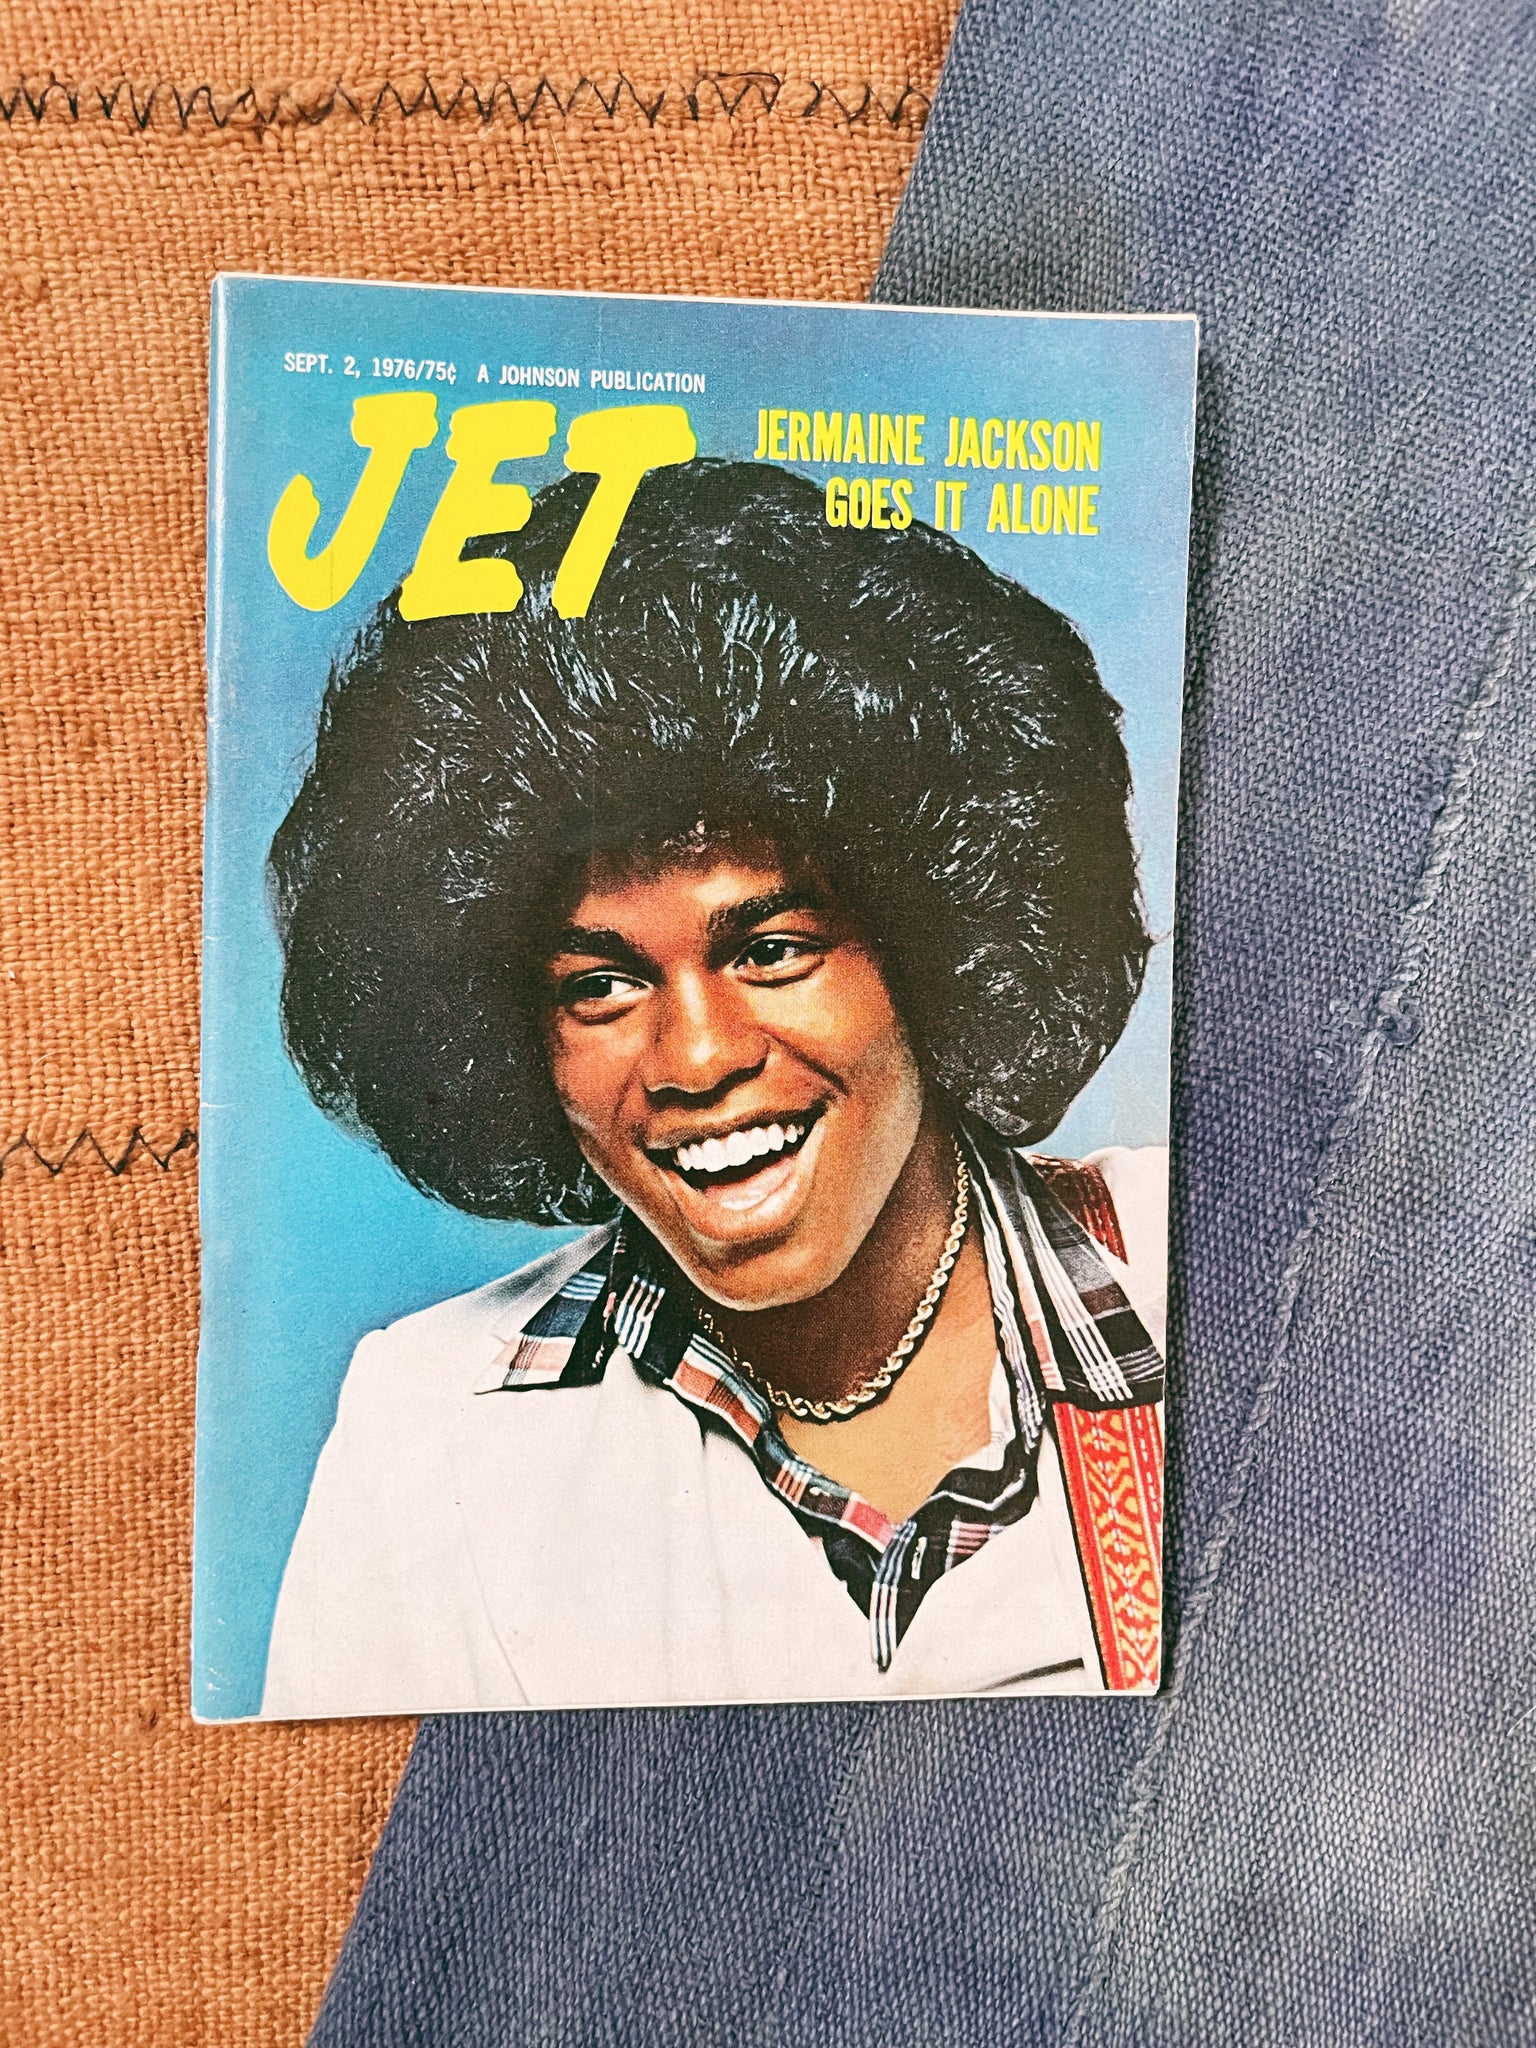 Vintage Jet Magazine // Assorted Jackson Family Covers (Please Select)